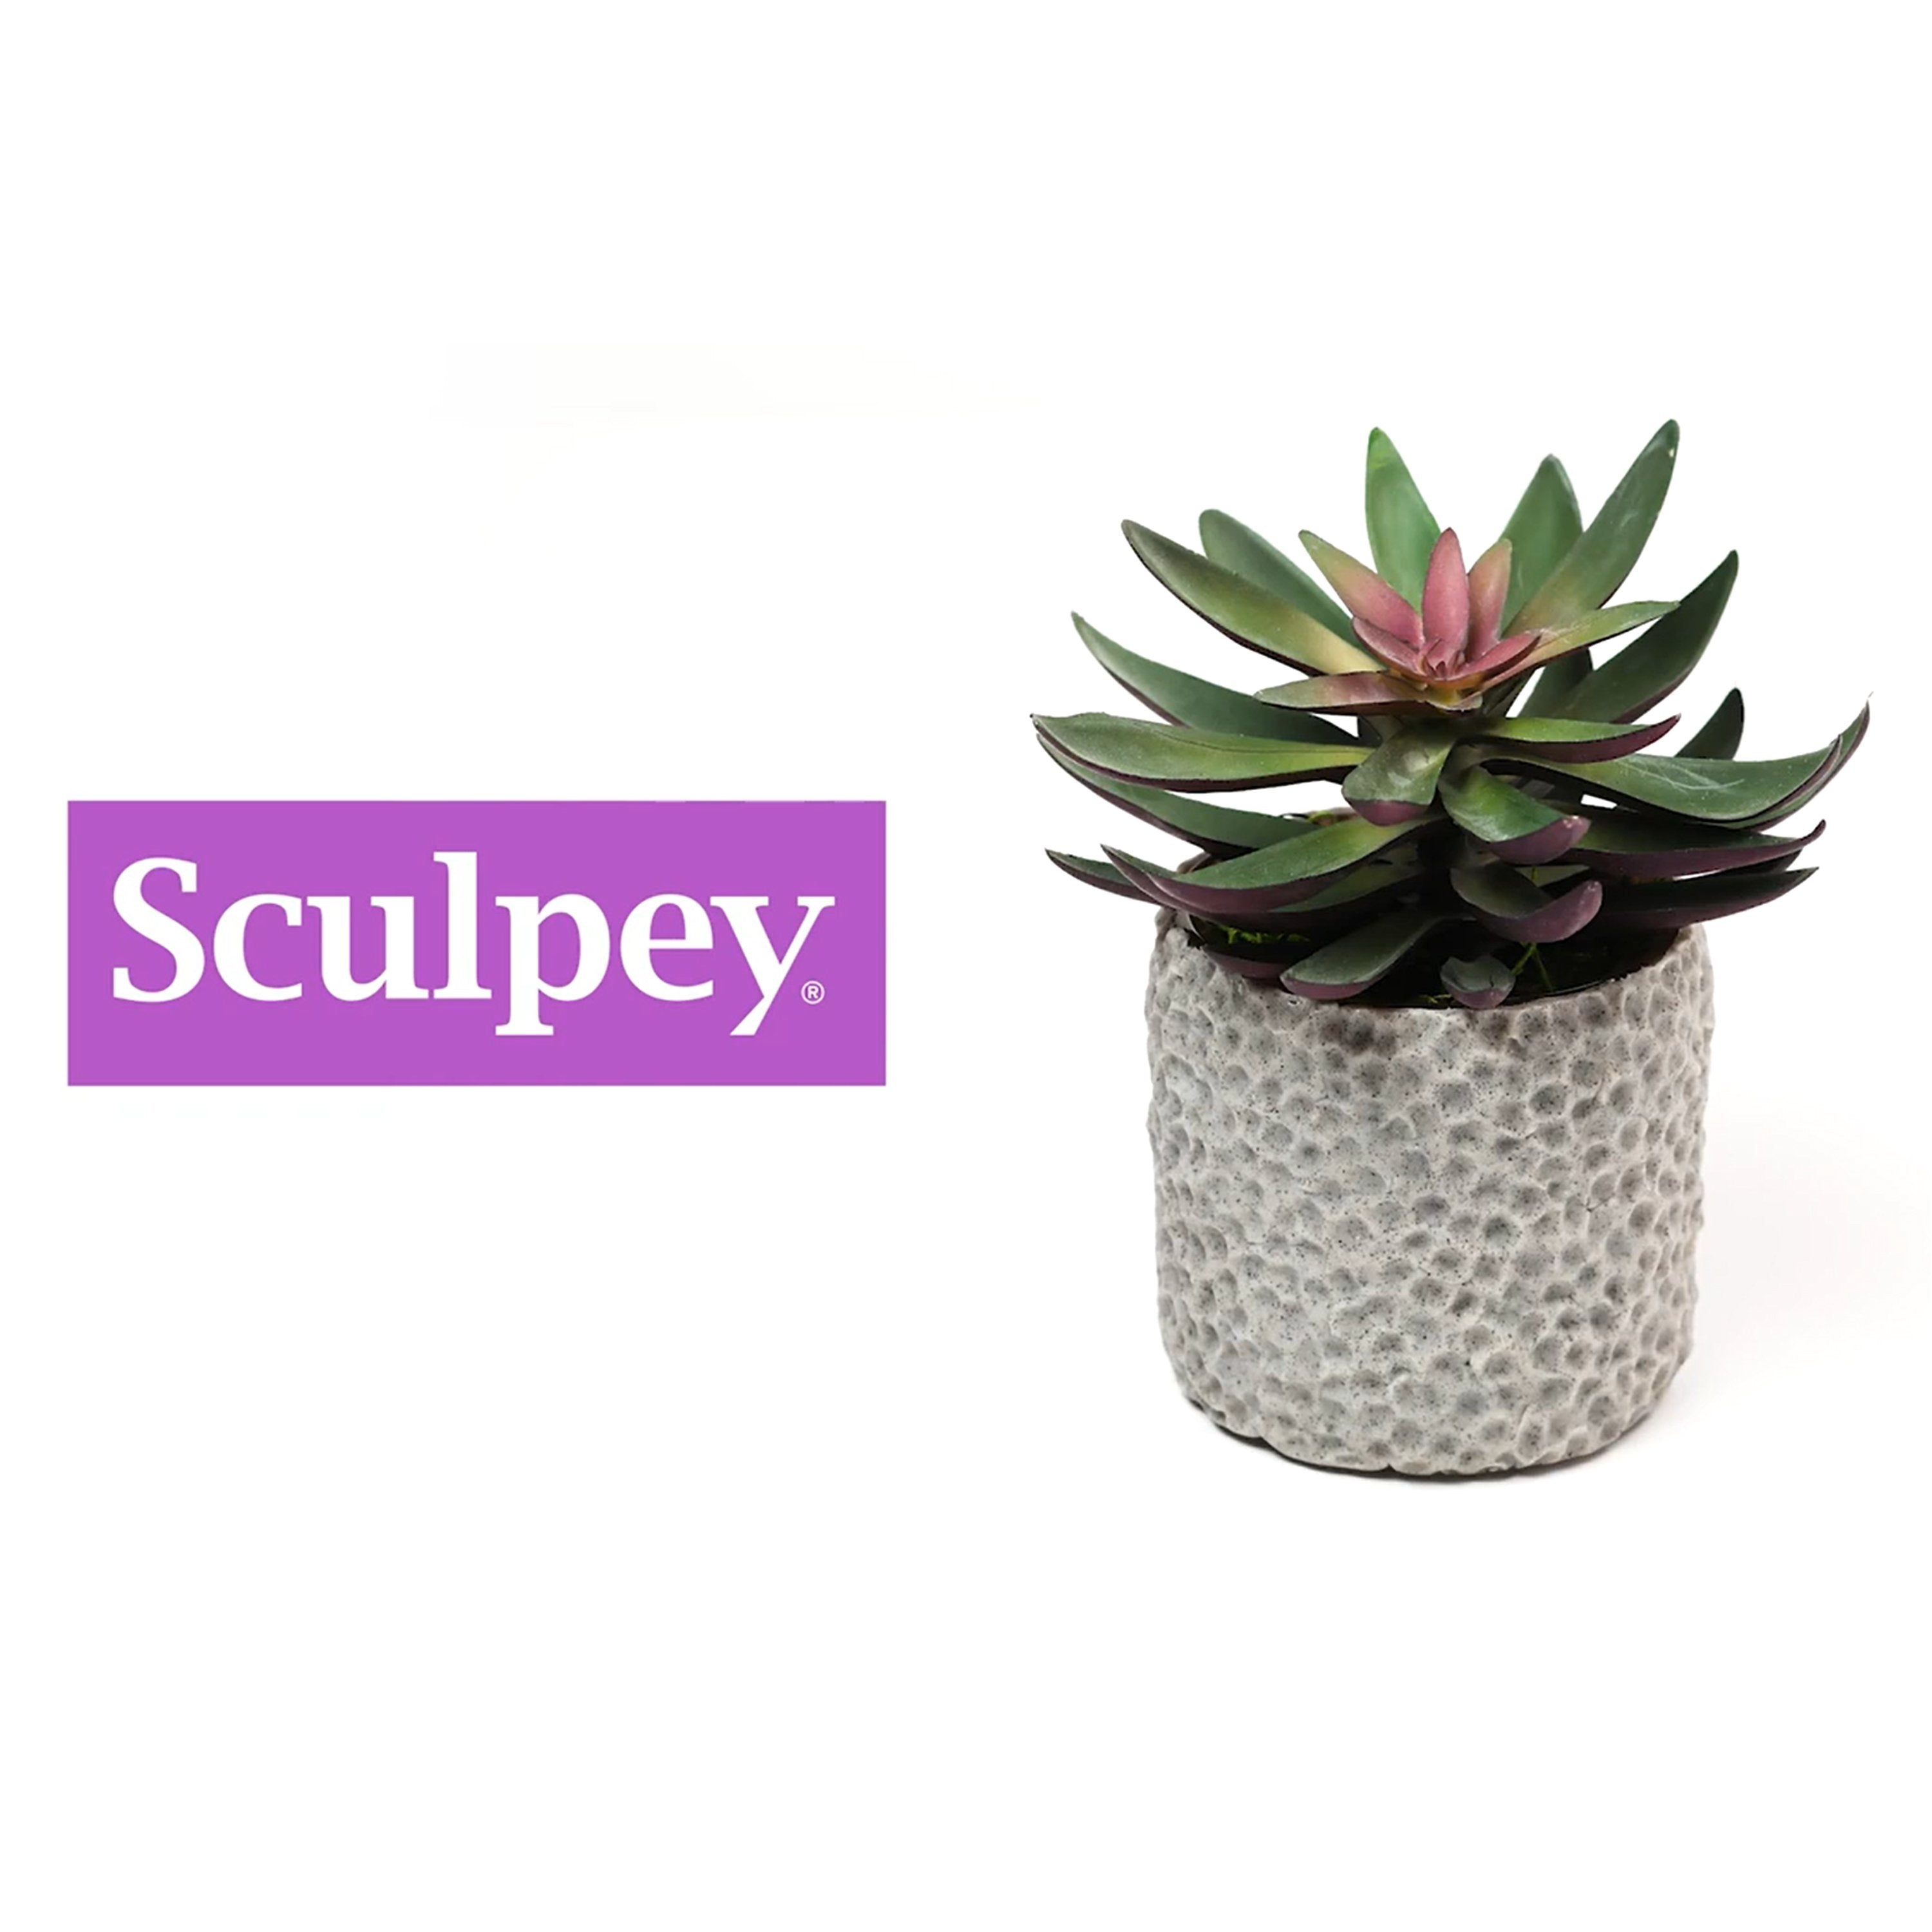 https://cdn.shopify.com/s/files/1/0075/9270/6115/files/Quick_Clay_Craft_-_Easy_Succulent_Vase_with_Sculpey_Premo_Clay.mp4?v=1609572658